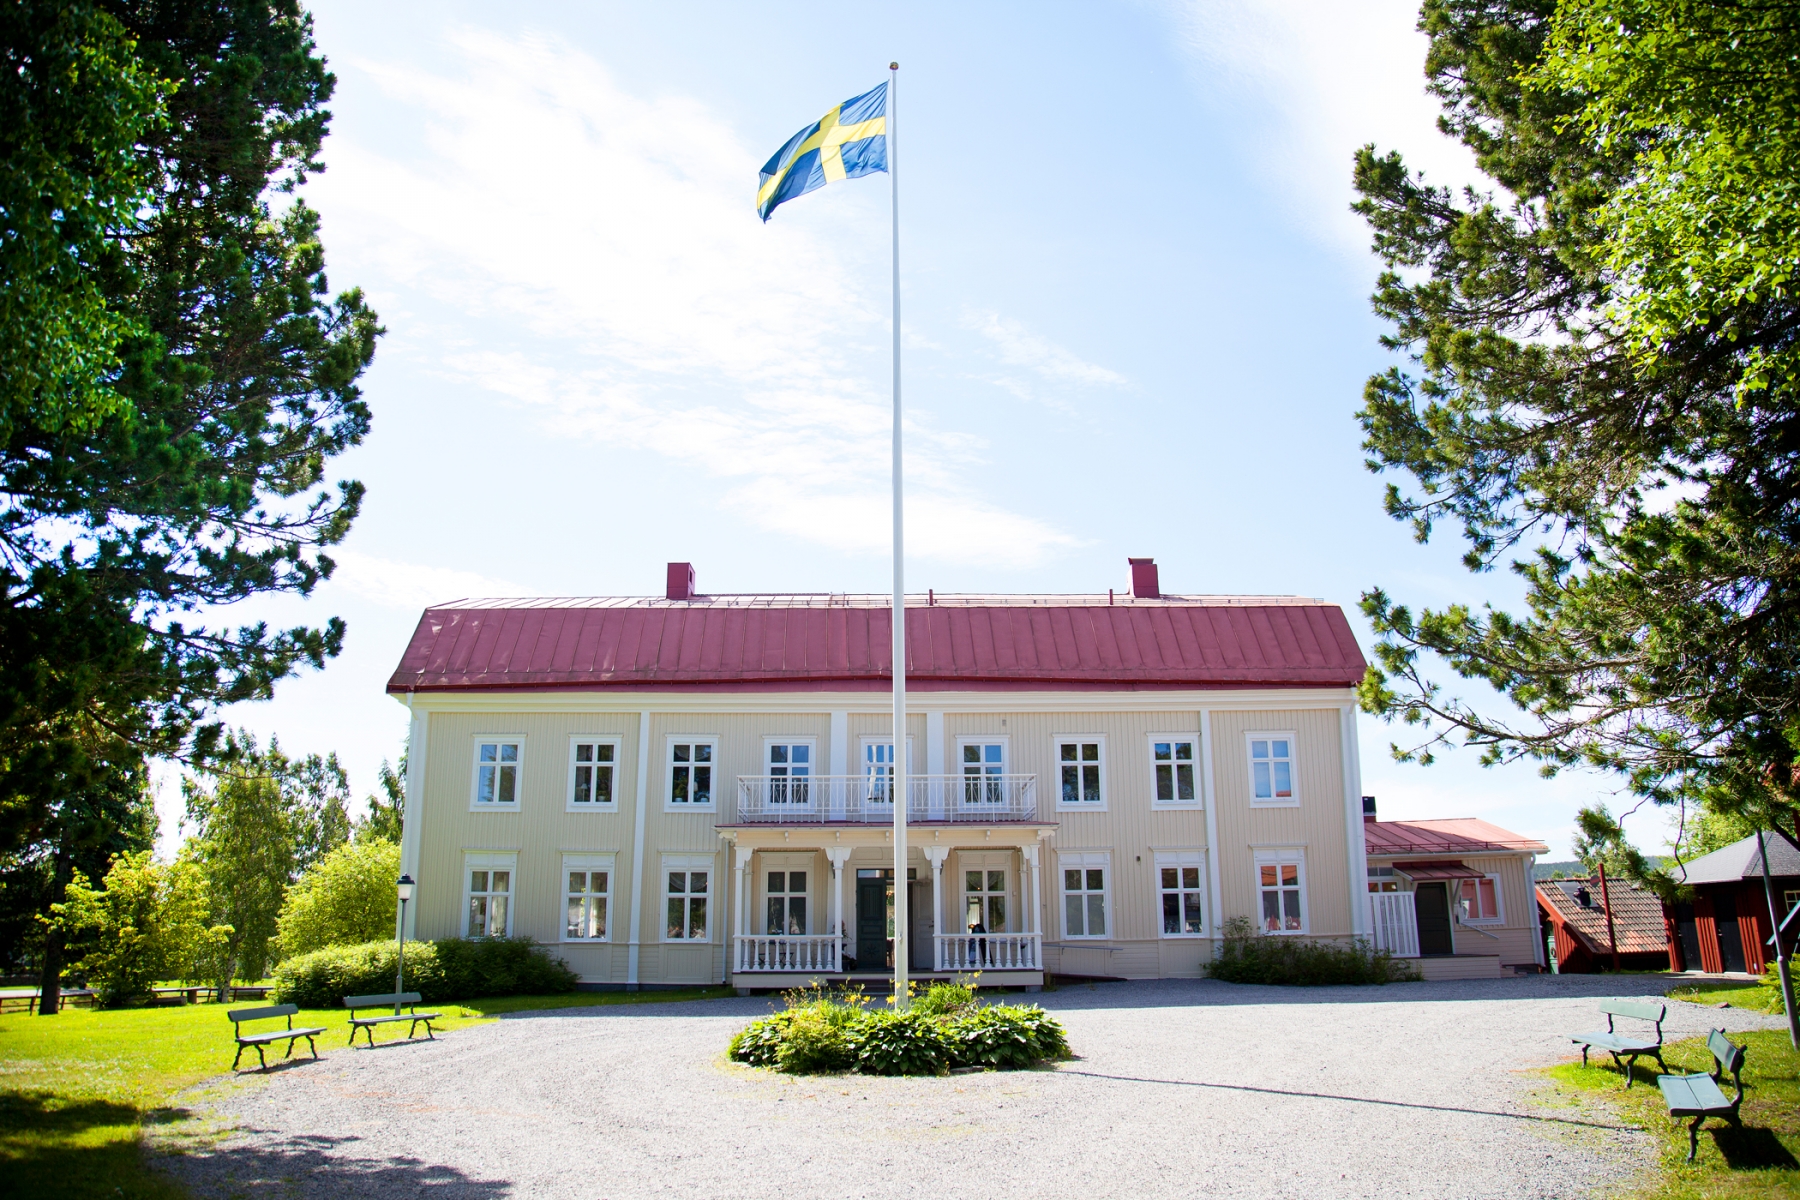 Stiftsgården Konferens & Hotell <br/>60.34 ew <br/> <a href='http://vakantieoplossing.nl/outpage/?id=d89bccaa6e29904a3a145c8c5fa1c3dd' target='_blank'>View Details</a>